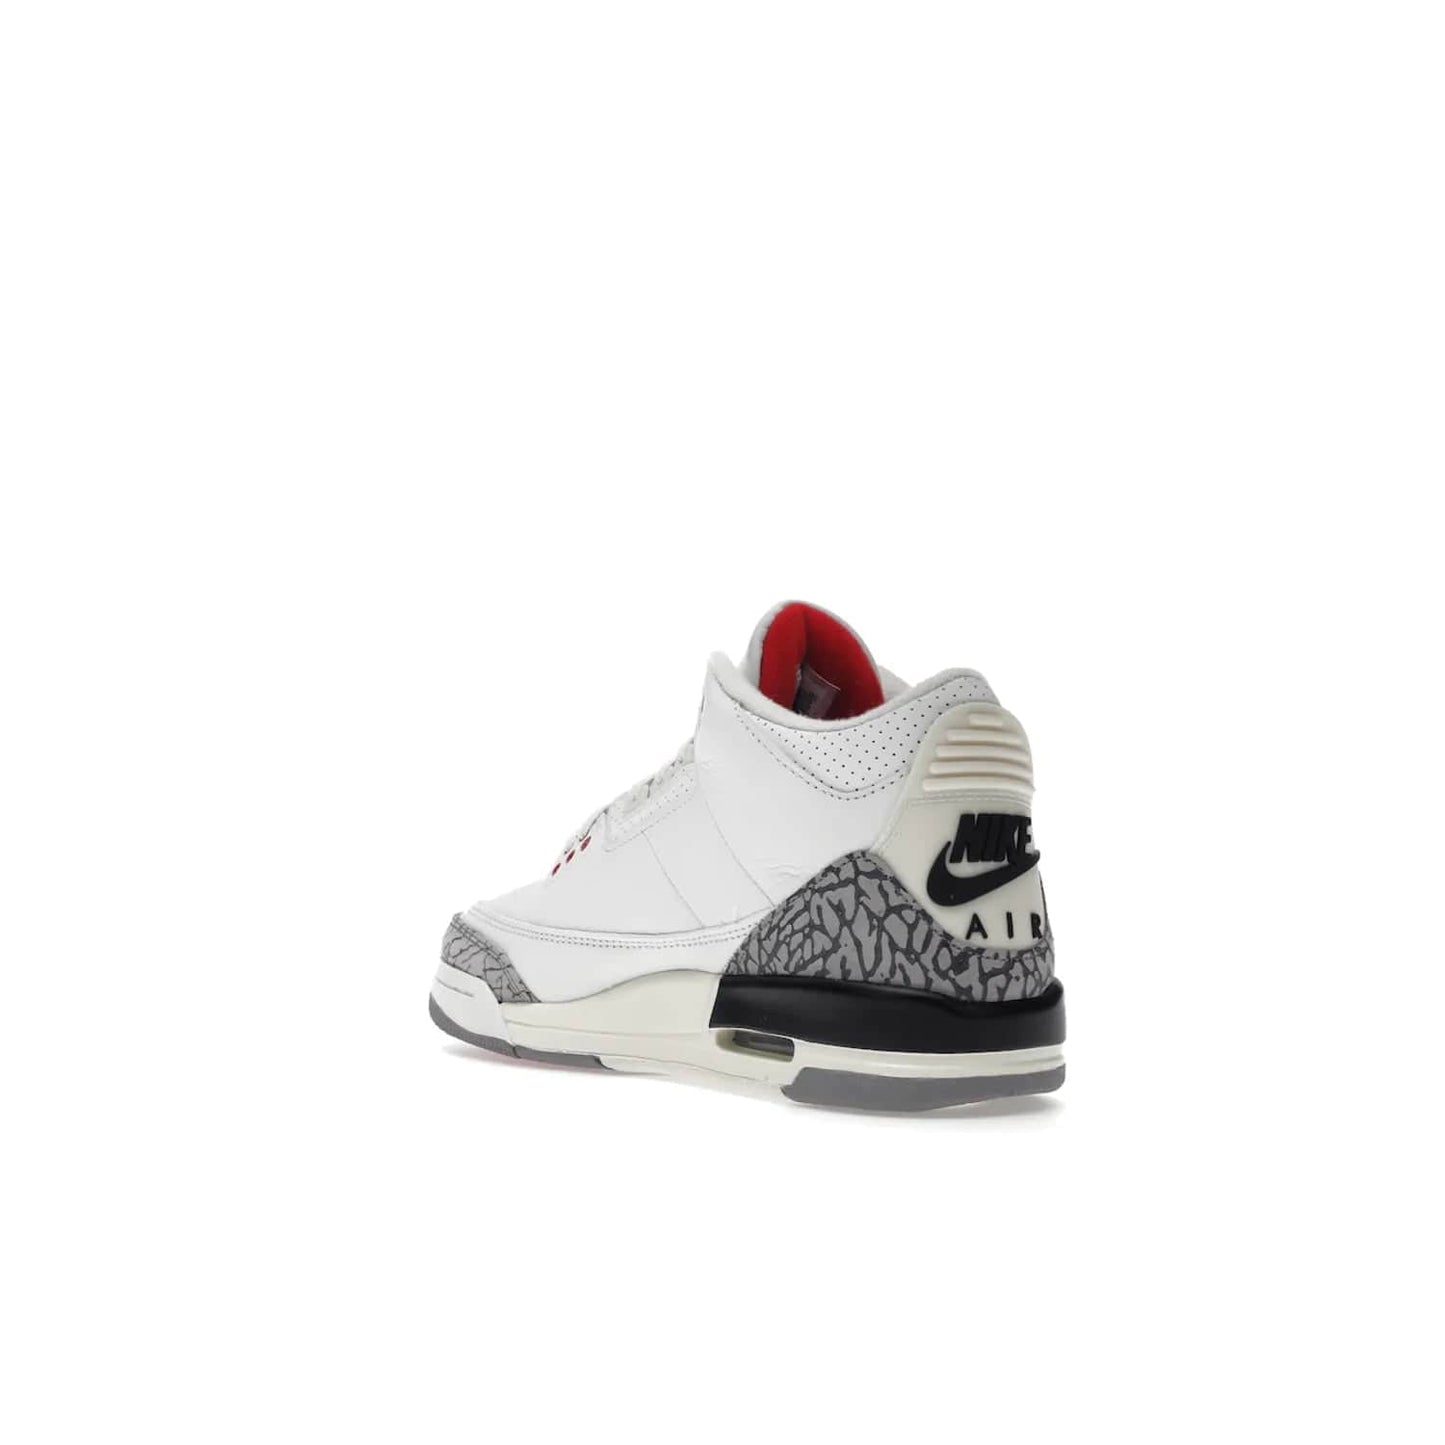 Jordan 3 Retro White Cement Reimagined (GS) - Image 24 - Only at www.BallersClubKickz.com - Grab the perfect blend of modern design and classic style with the Jordan 3 Retro White Cement Reimagined (GS). Features Summit White, Fire Red, Black, and Cement Grey colorway, iconic Jordan logo embroidered on the tongue, and “Nike Air” branding. Limited availability, get your pair before March 11th 2023.